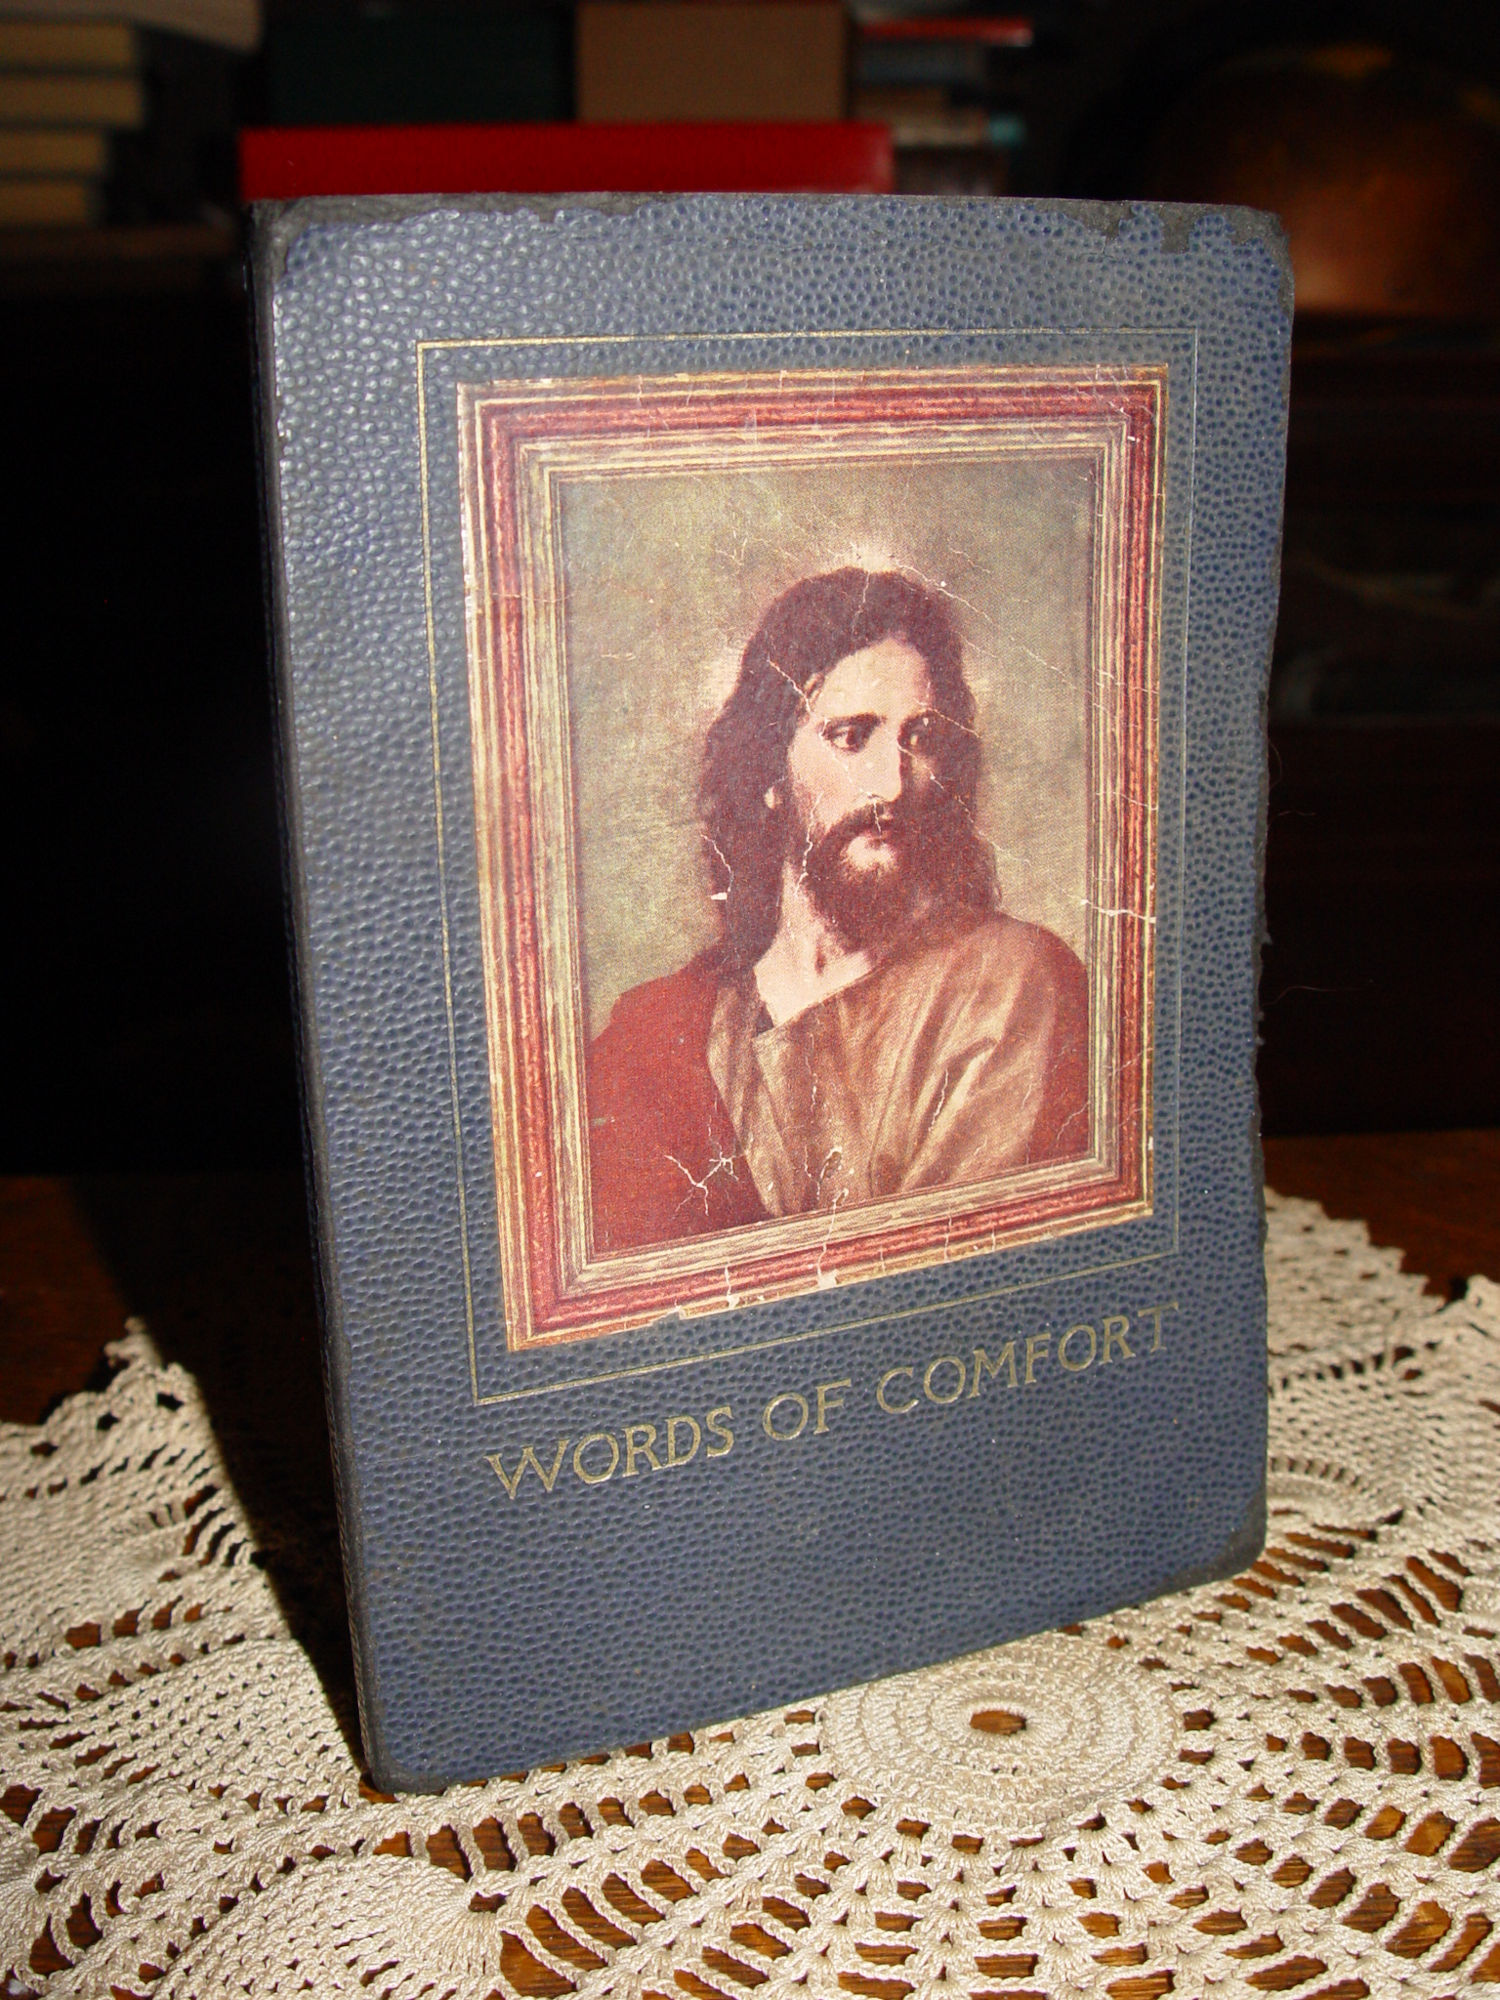 1933 Words of
                        Comfort: Precious Passages from Holy Scripture
                        N. N. Ronning